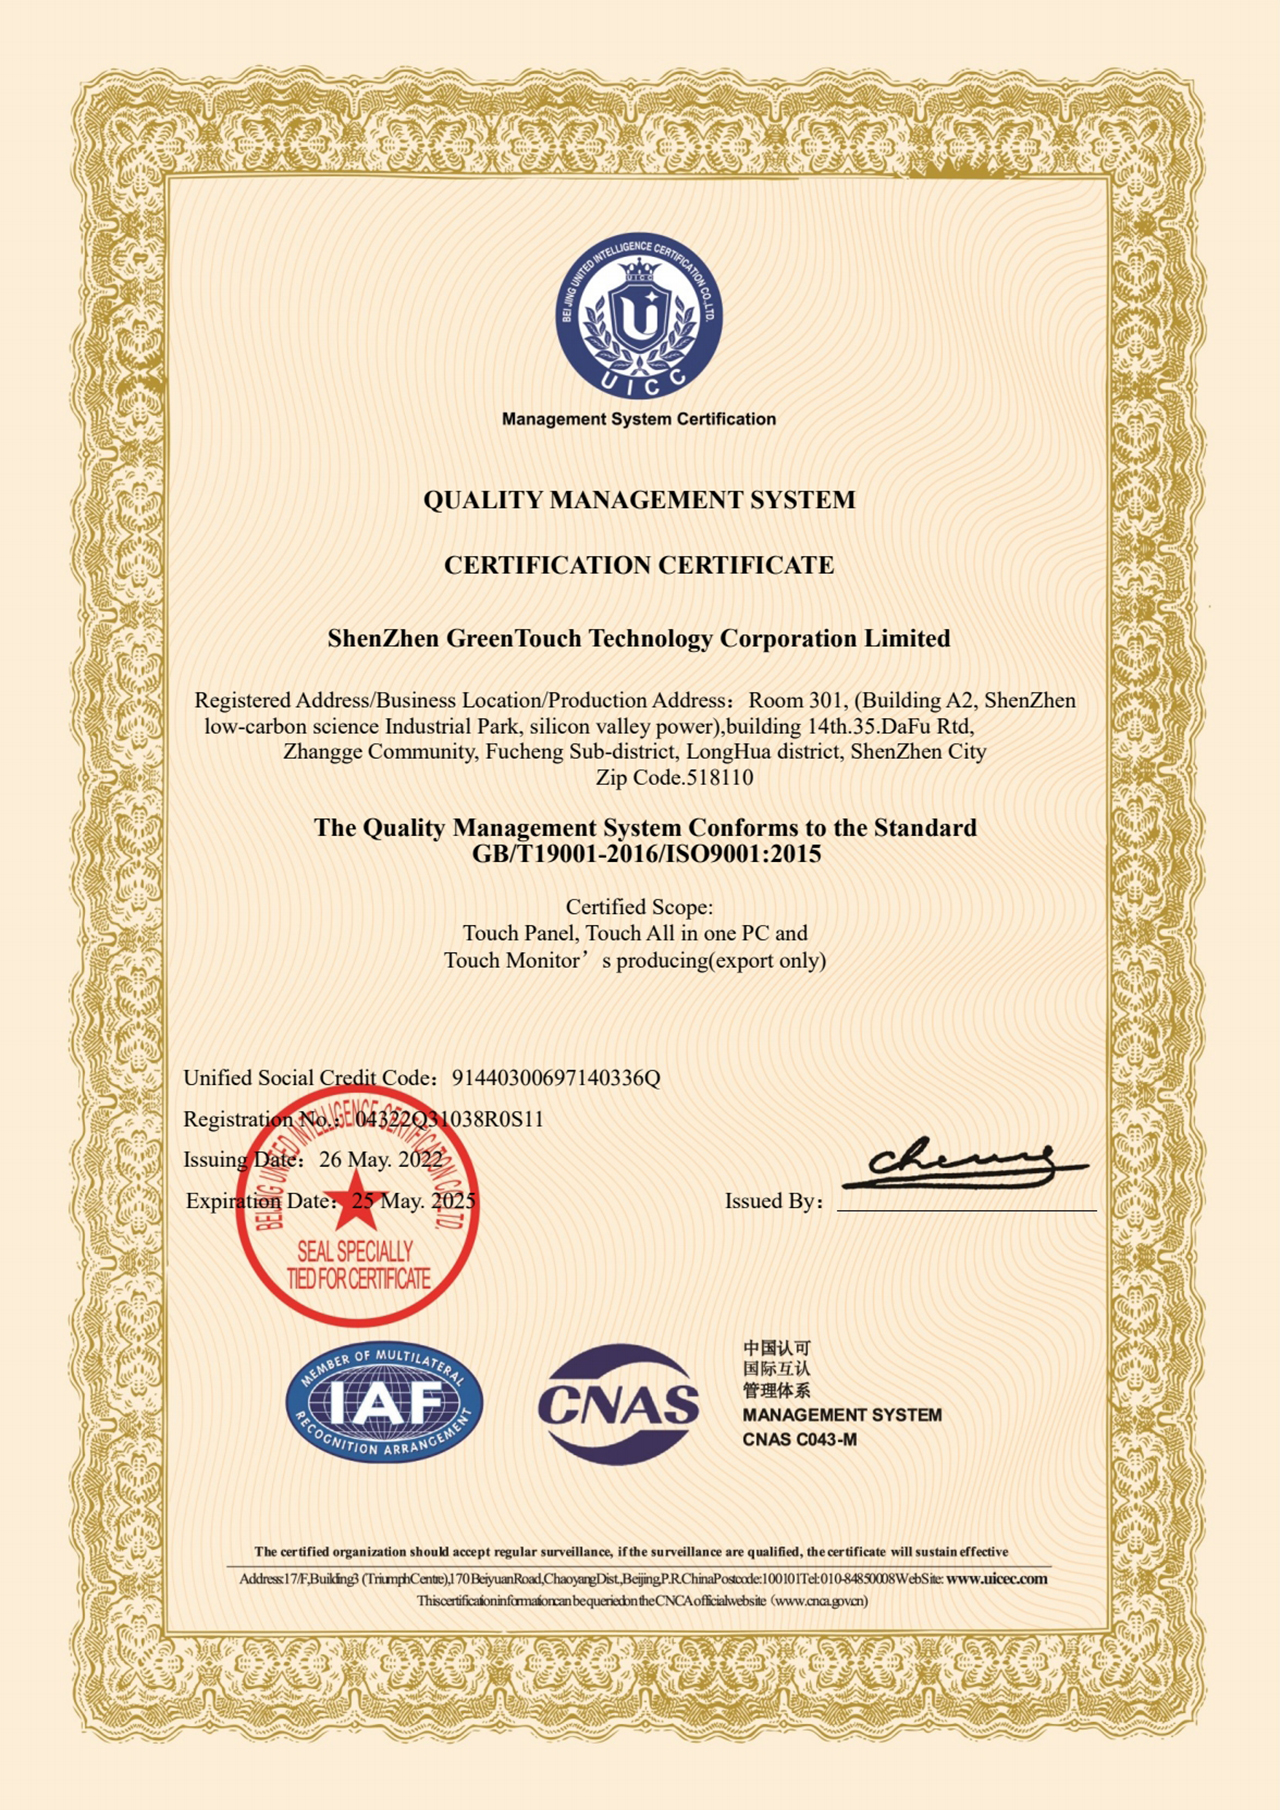 Certificate of ISO